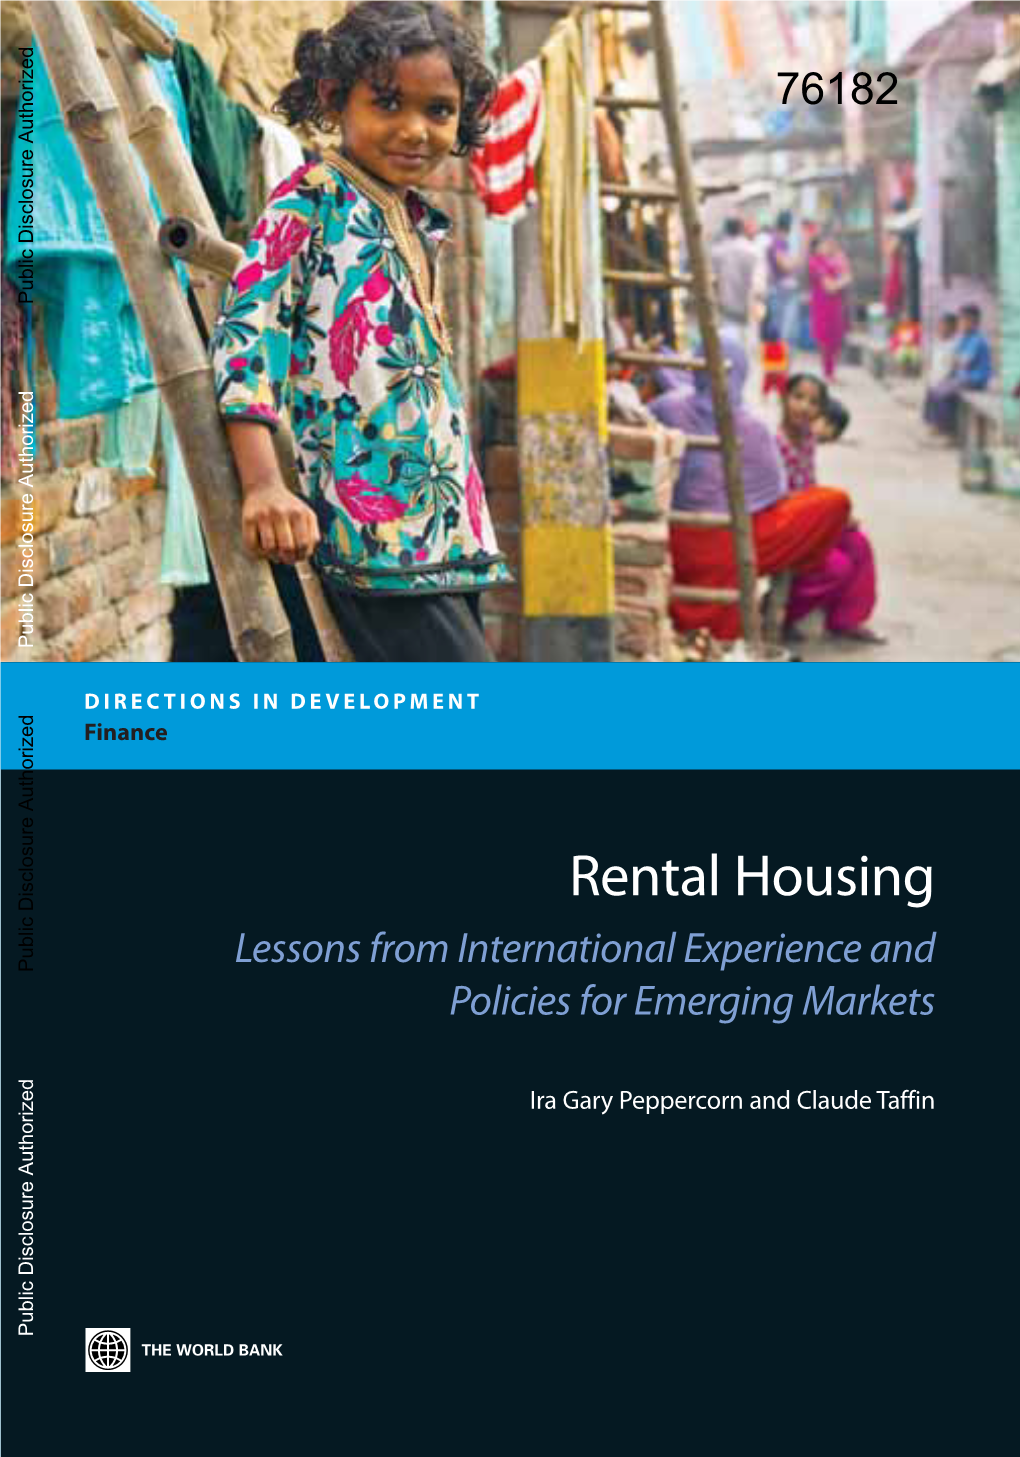 Rental Housing: Lessons from International Experience and Policies for Emerging Markets